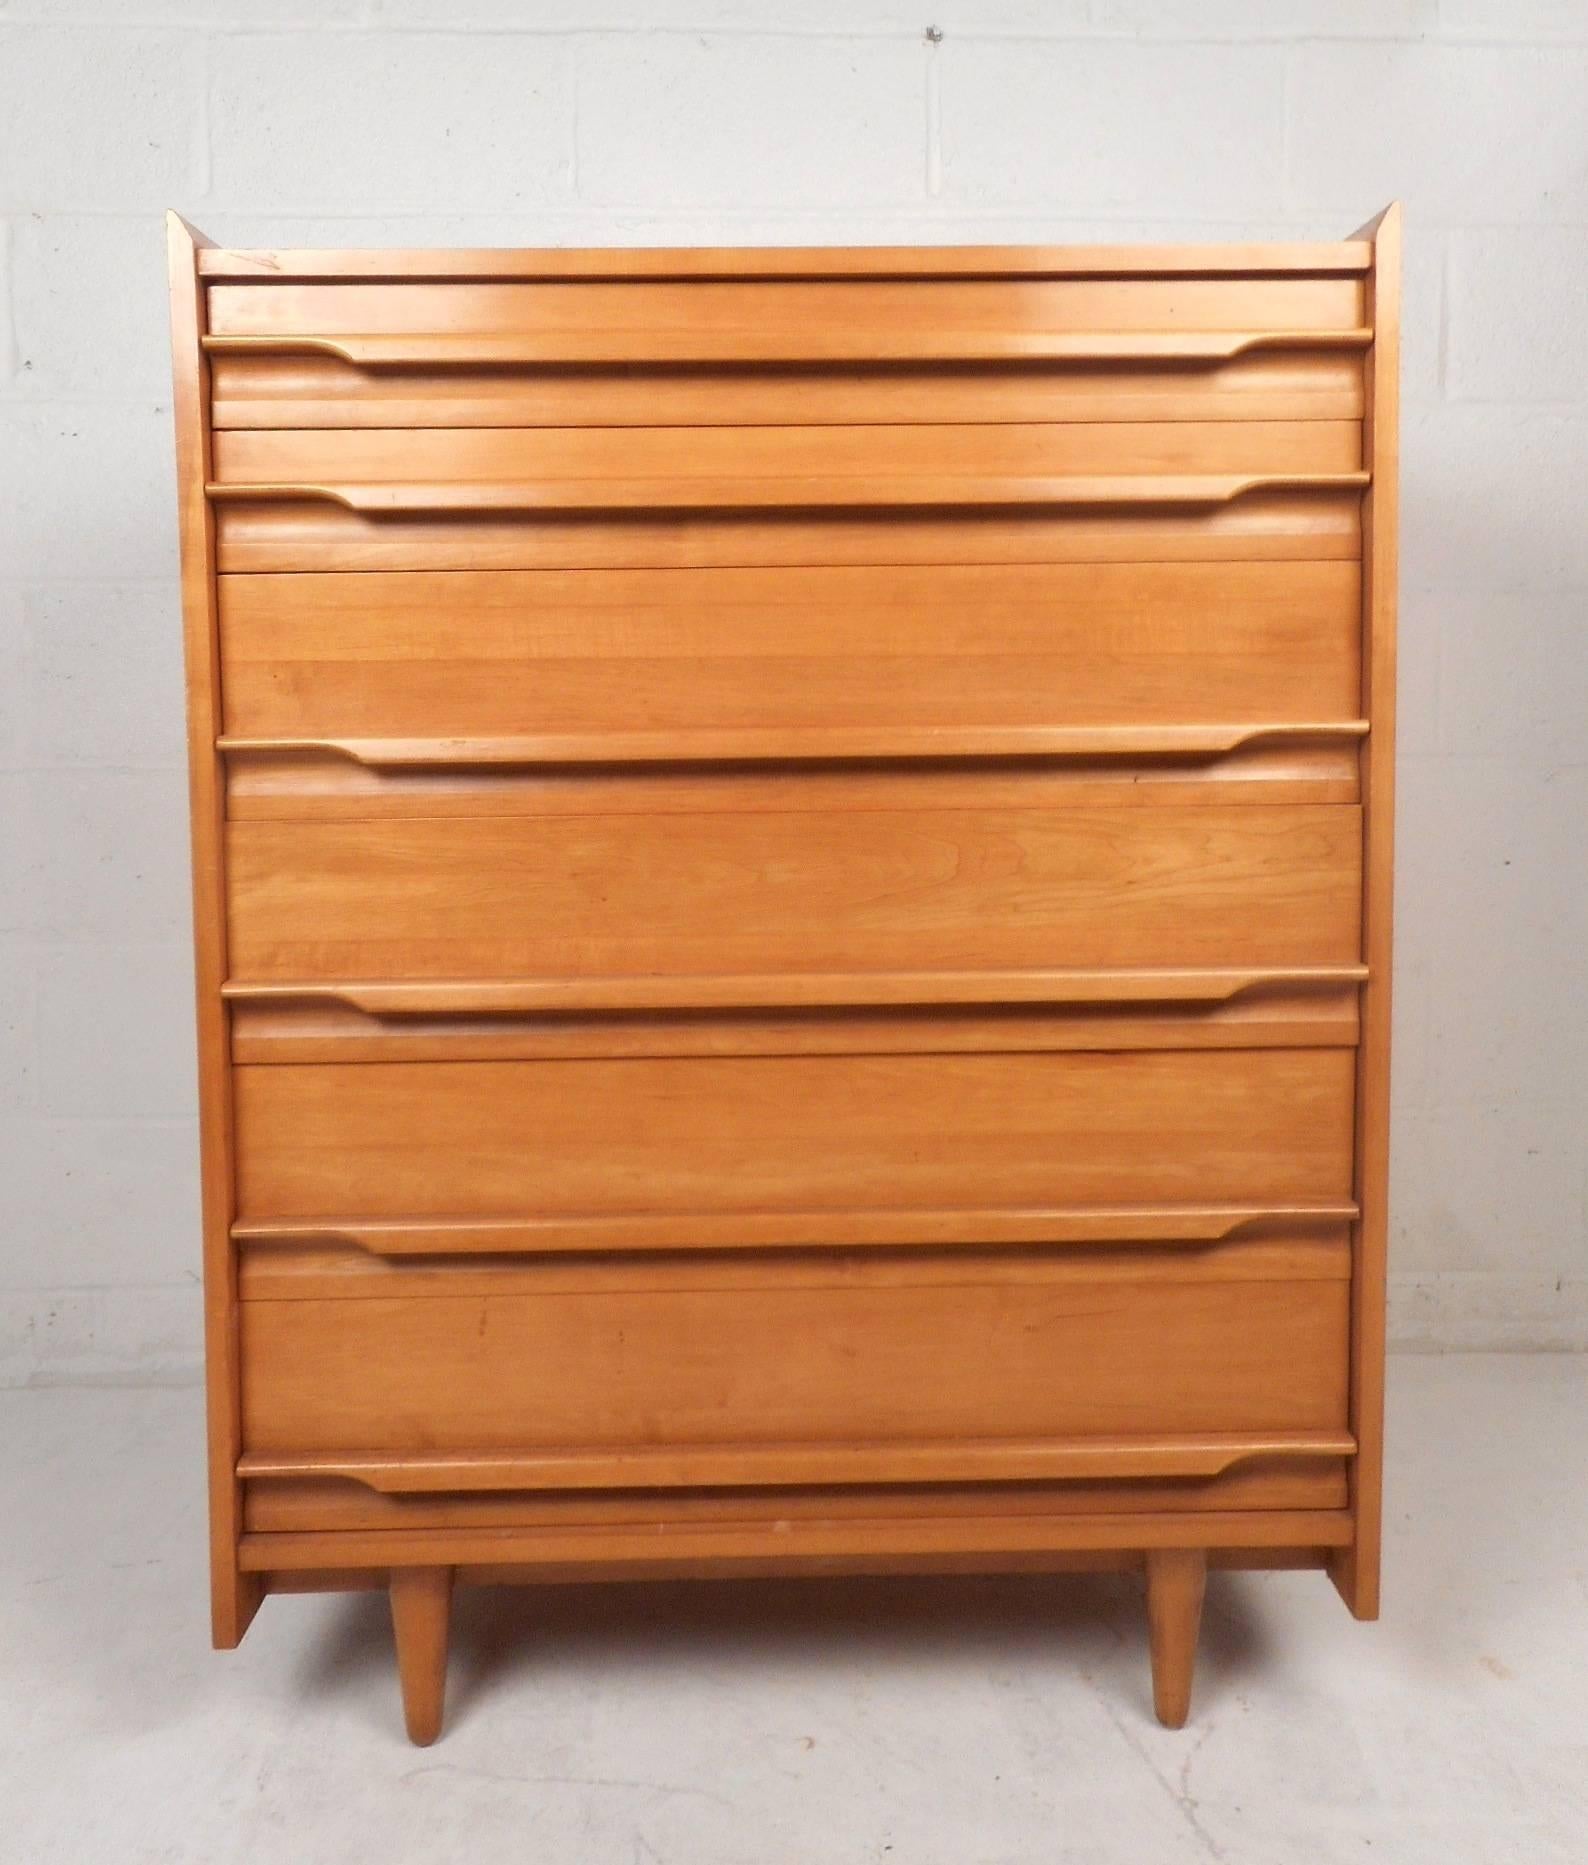 This stunning vintage modern dresser features six large drawers with unique sculpted pulls that stretch all the way across the centre of each drawer. Stylish design with raised edges along the top, tapered legs, and beautiful maple wood grain